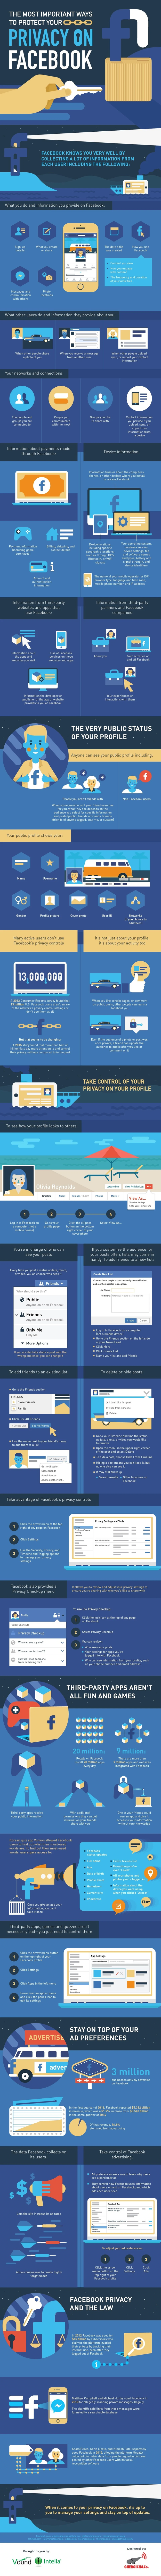 The Most Important Ways to Protect Your Privacy on Facebook - #infographic